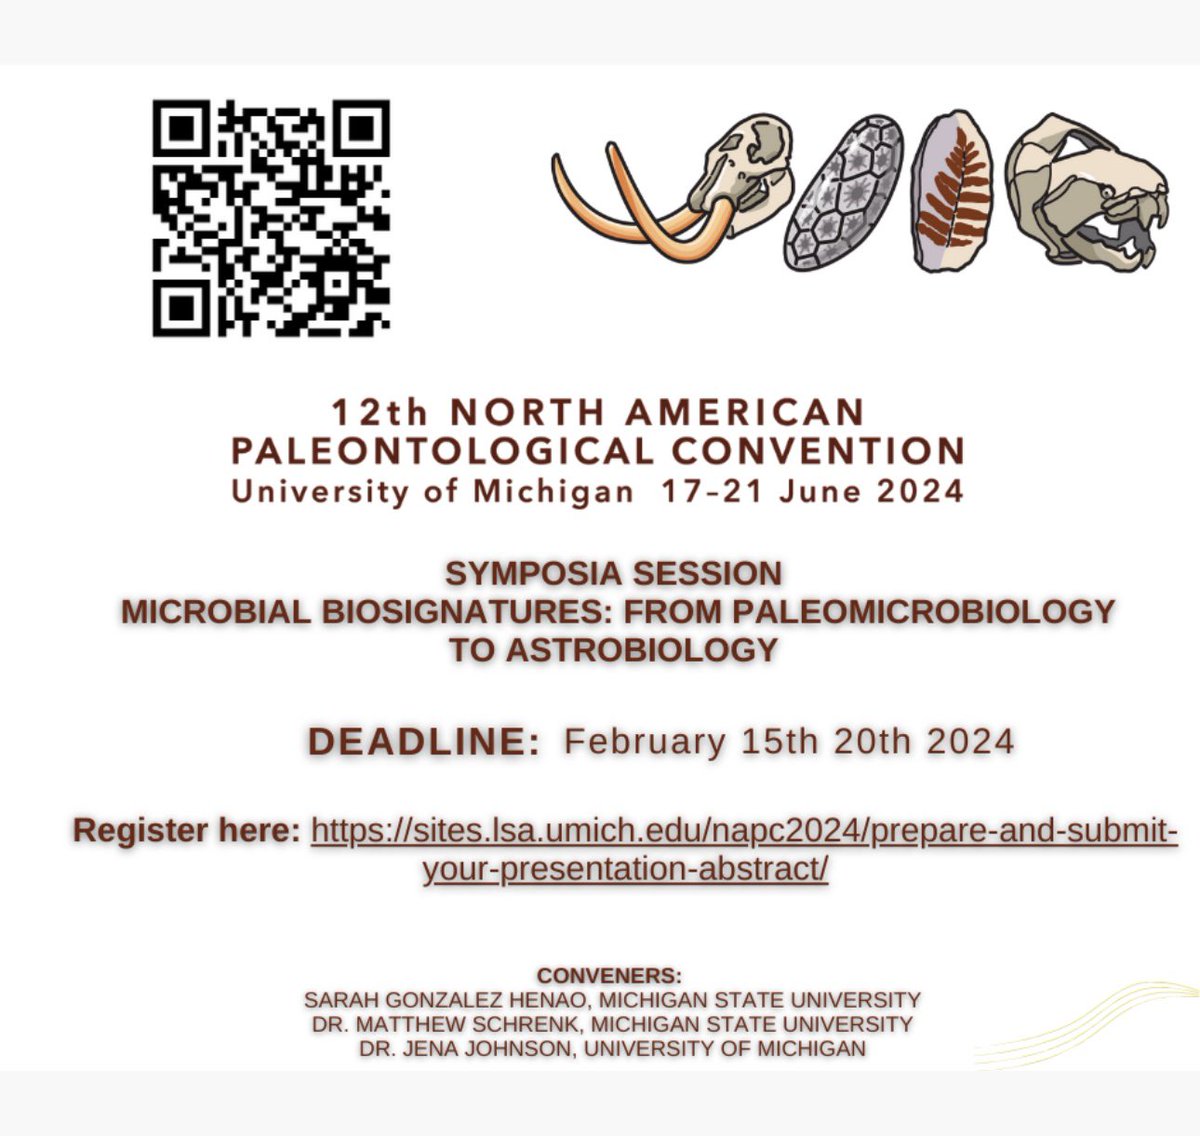 Working on microbial biosignatures and paleomicrobiology? 

Submit your abstract to the symposia session “Microbial biosignatures:from paleomicrobiology to Astrobiology”

One week away from abstract submission to #NAPC2024
#astrobiology
 @Napc2024 @schrenk_lab 
@MSUNatSci